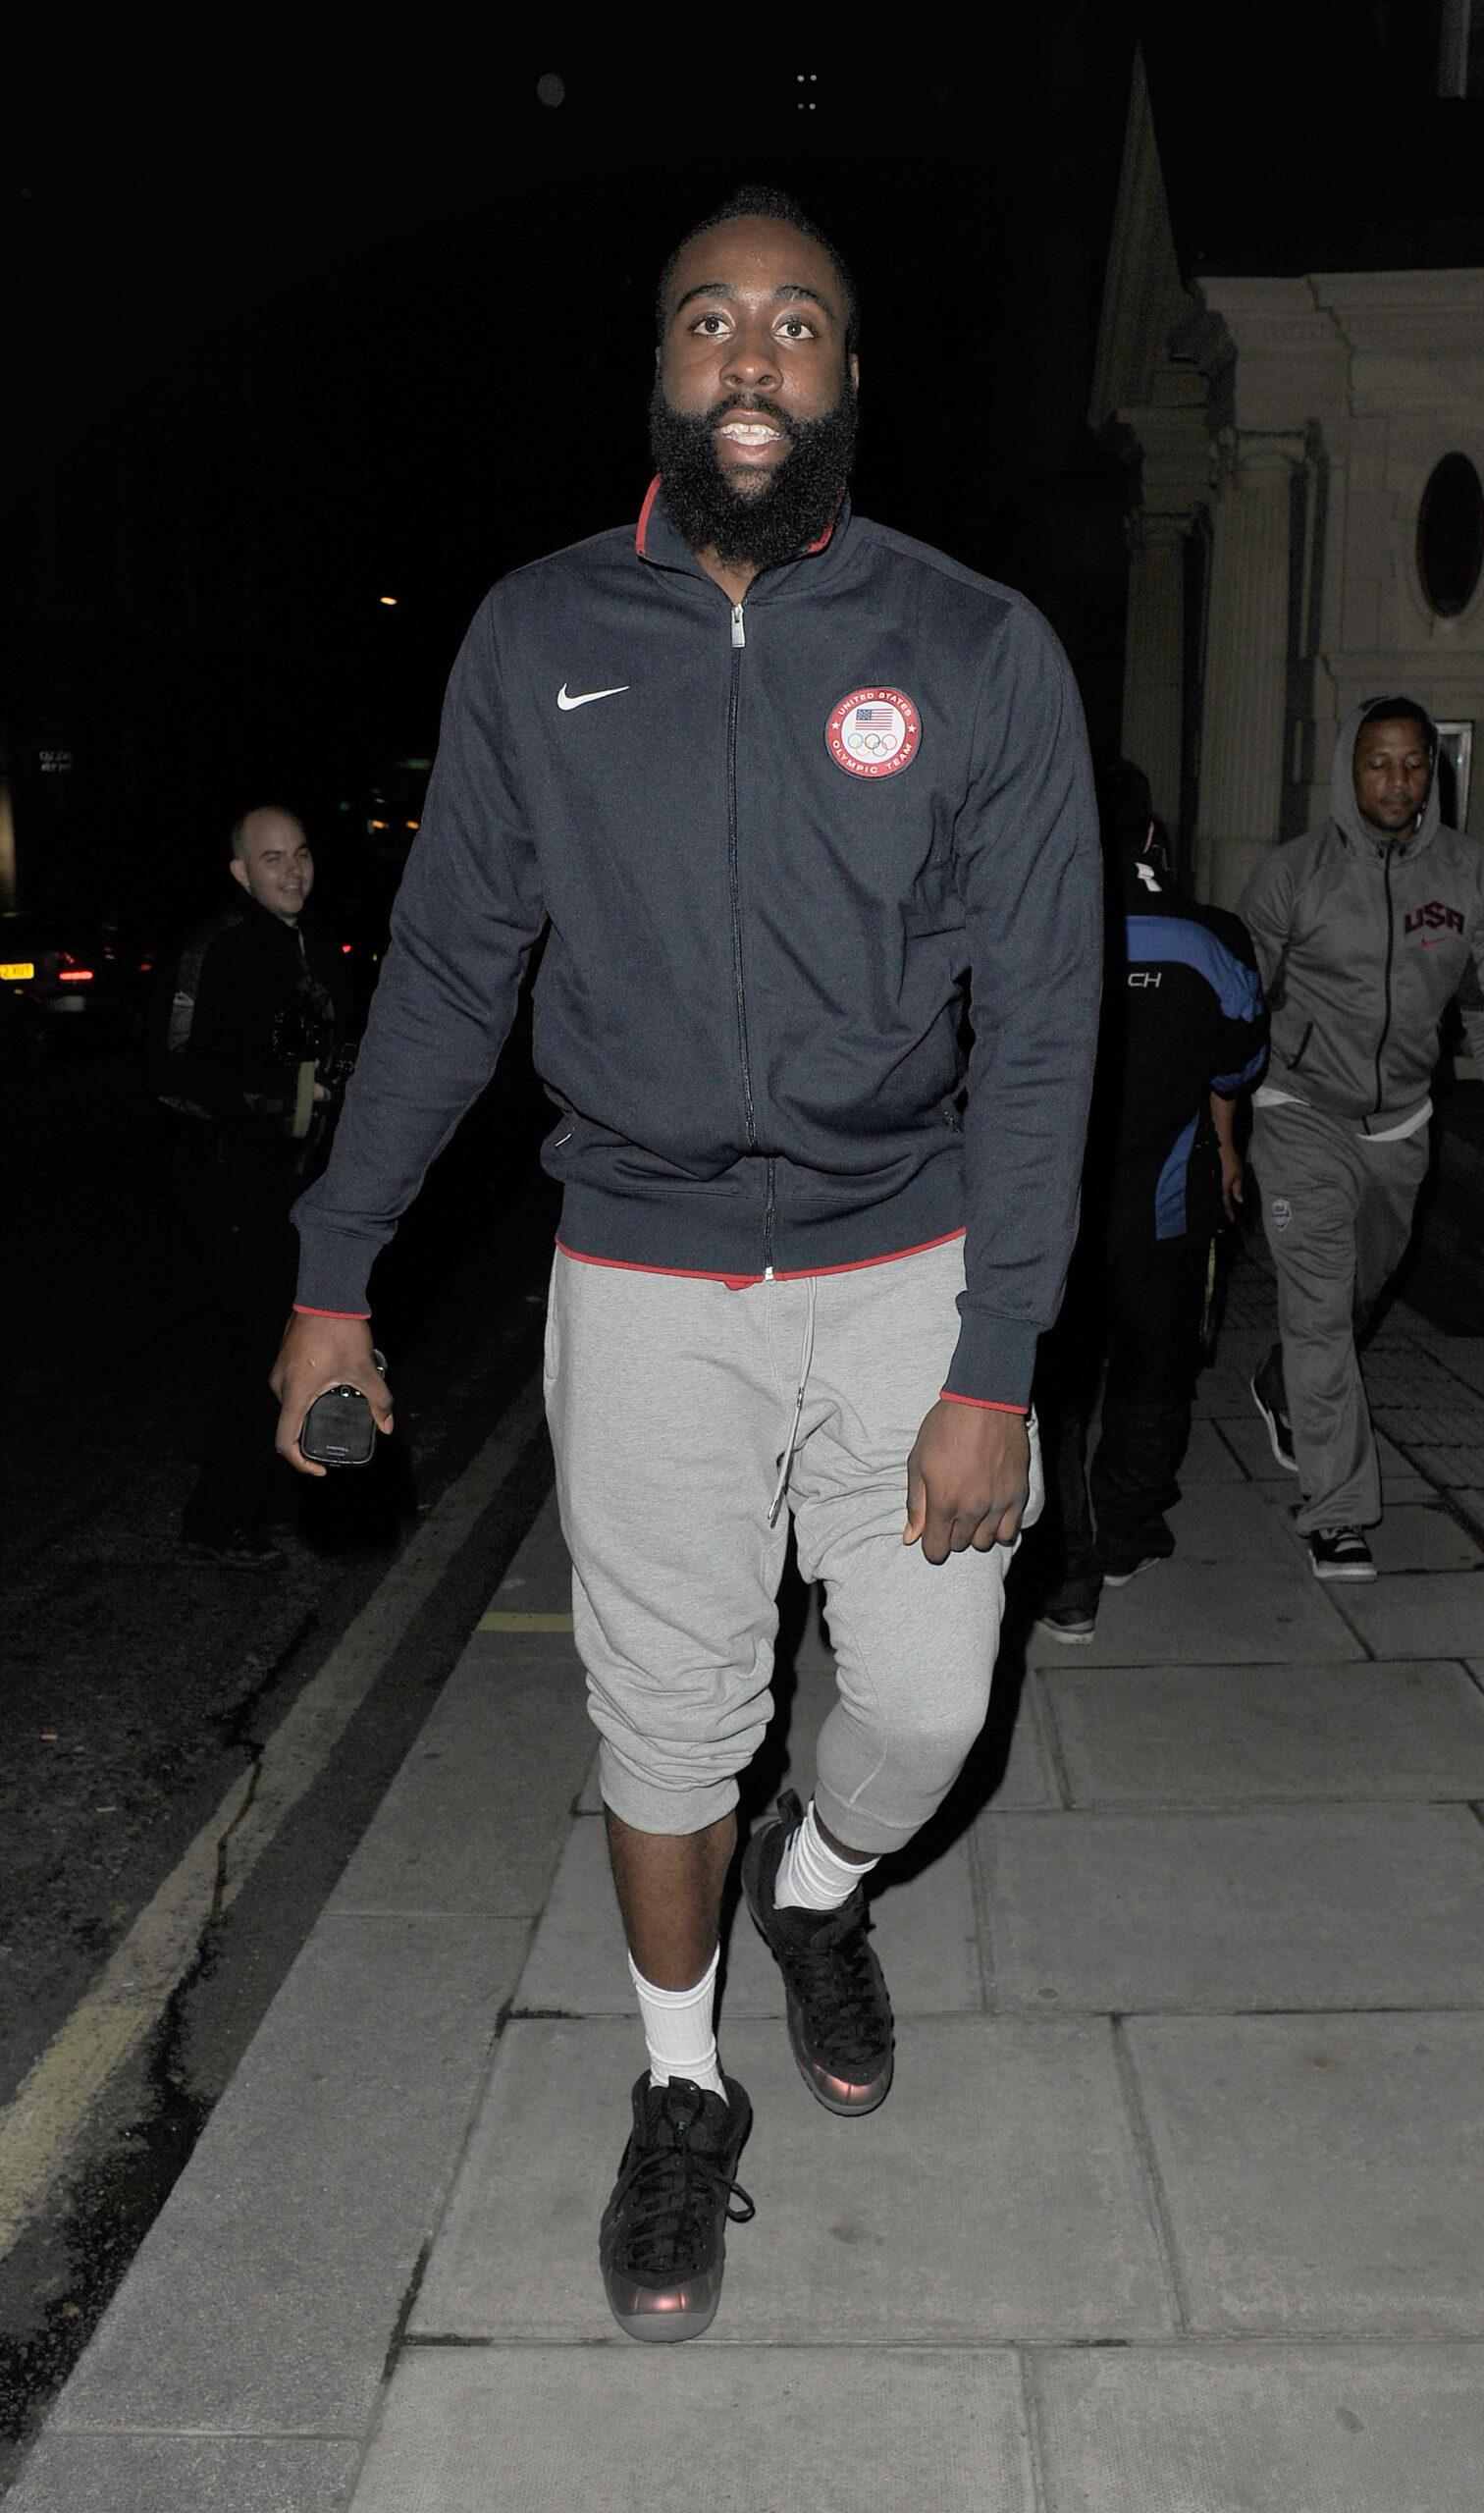 Members of the U S A olympic basketball team enjoy a night out at Funky Buddha nightclub in Mayfair